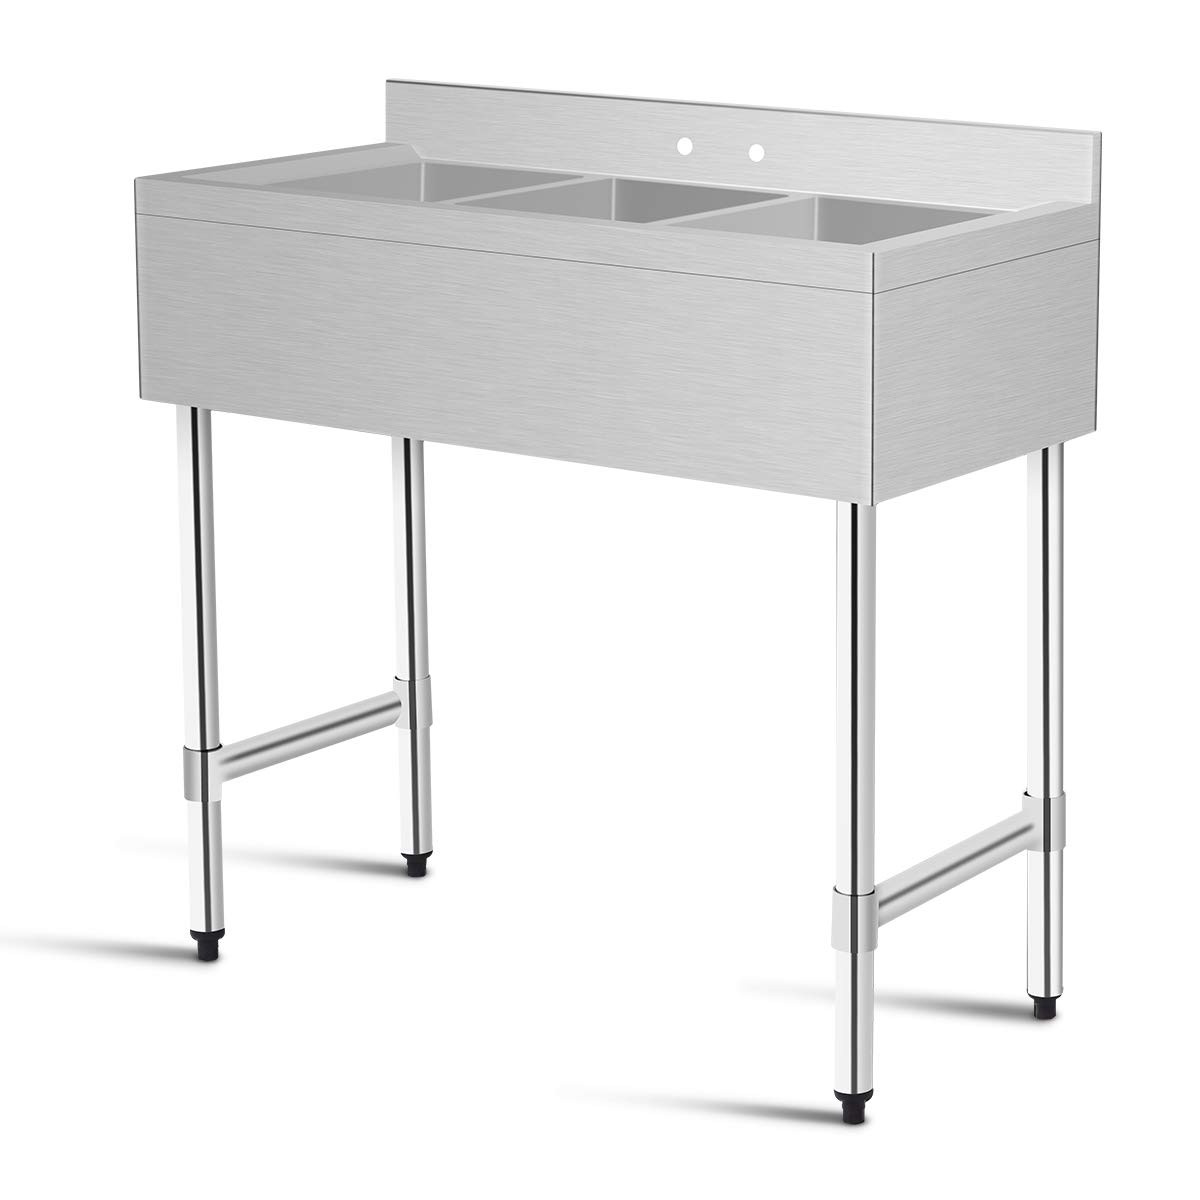 3-Compartment Stainless Steel Kitchen Commercial Sink